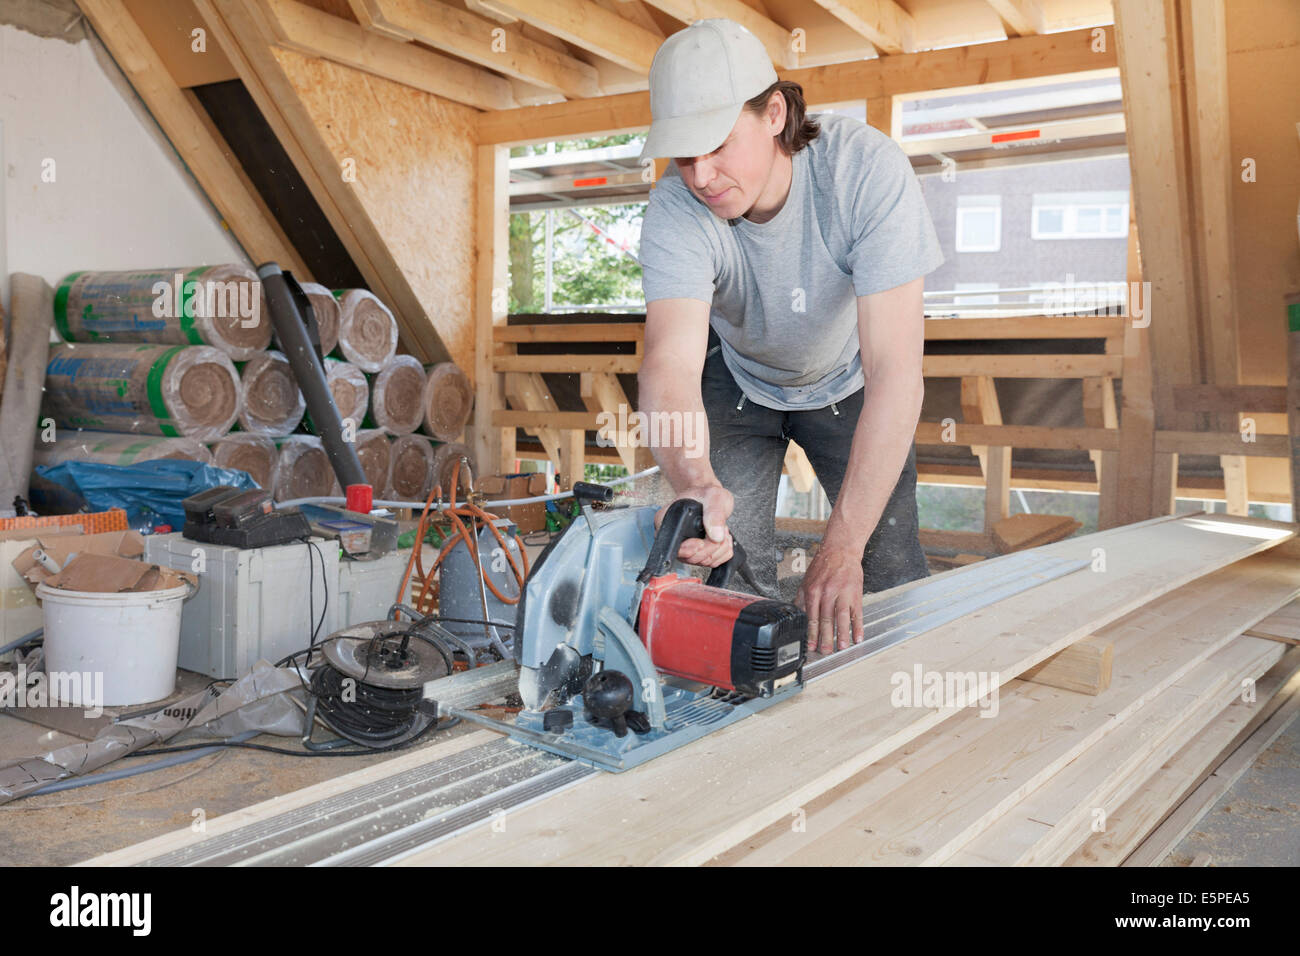 Carpenter working with a saw, roof truss extension Stock Photo